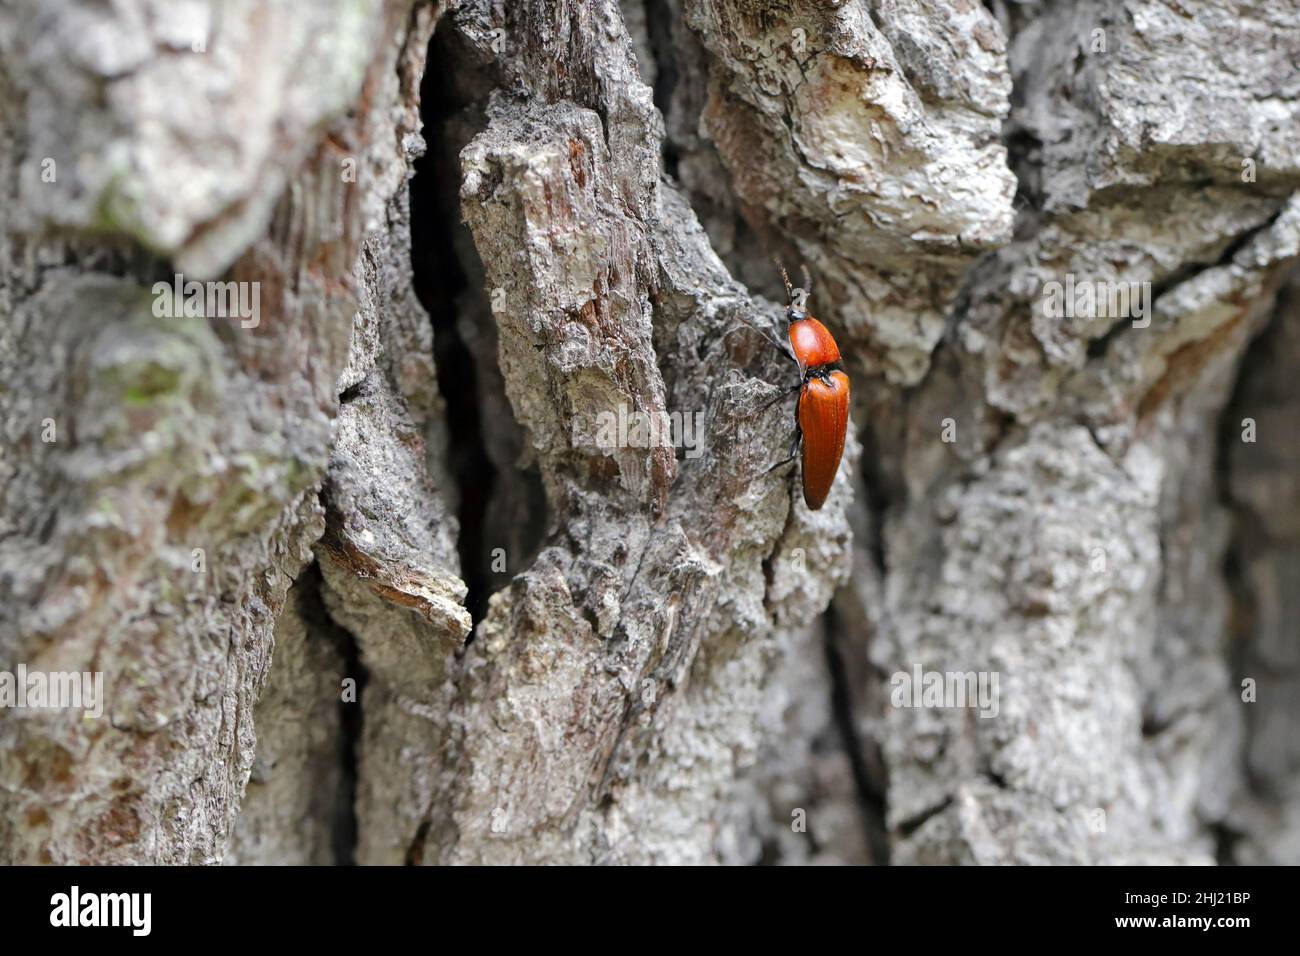 The close-up of the Elater ferrugineus, the rusty click beetle on an oak tree Stock Photo